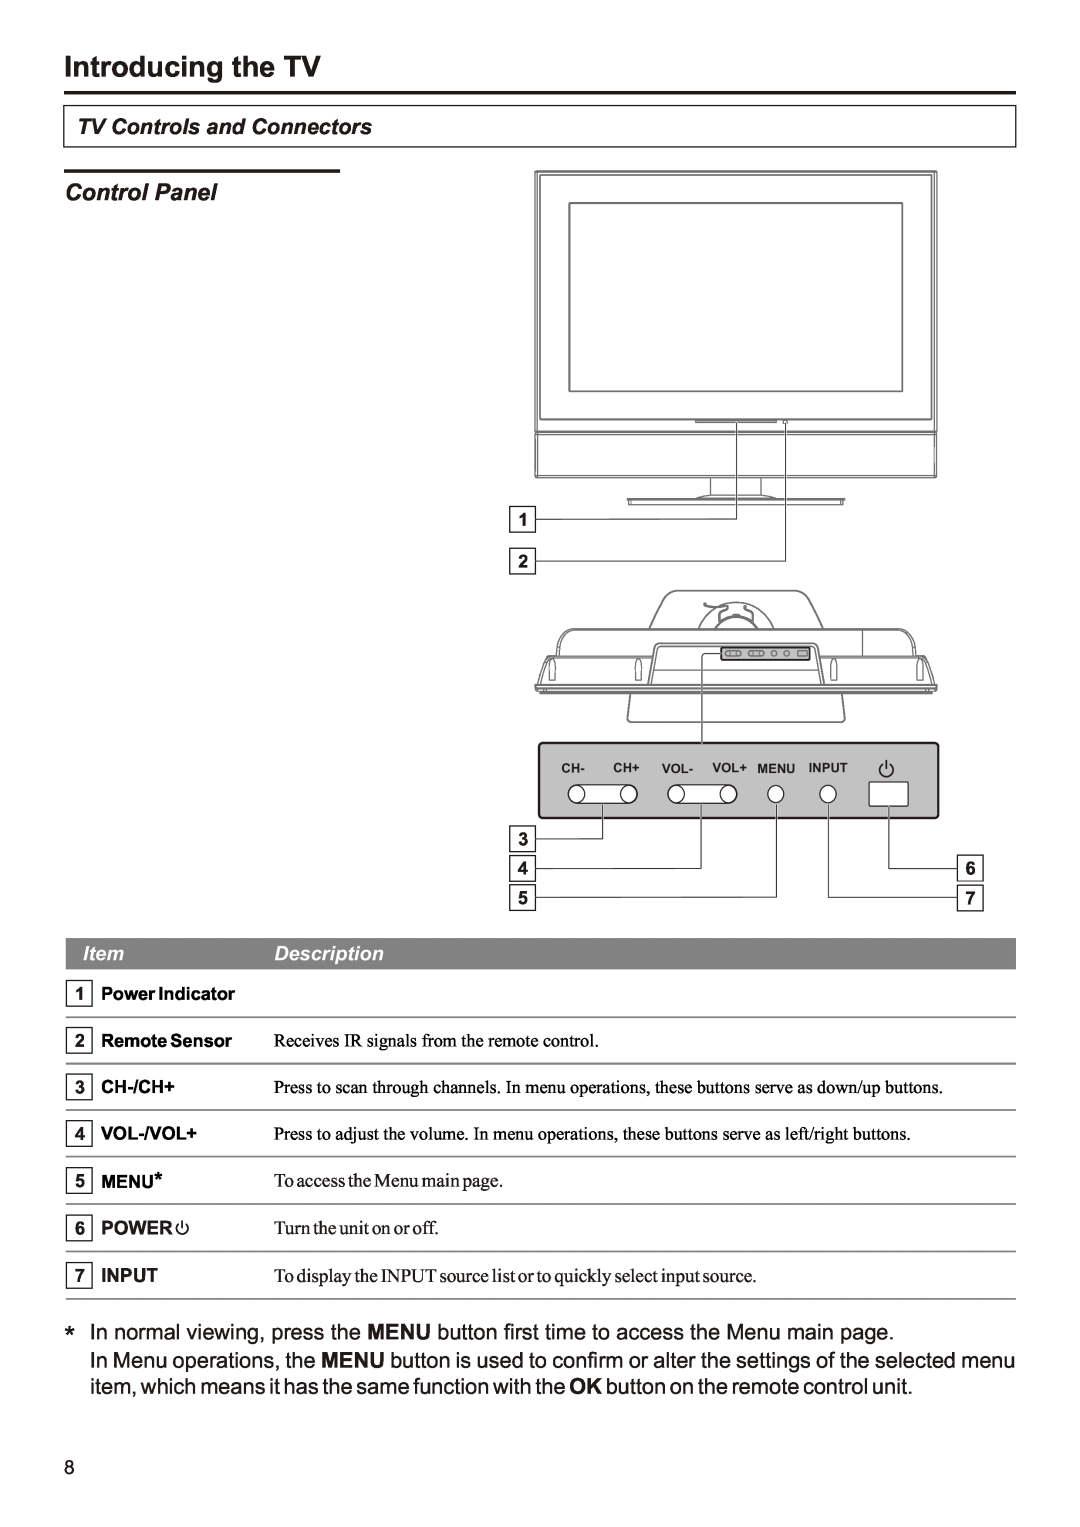 Audiovox FPE3207 operation manual Control Panel, TV Controls and Connectors, Introducing the TV 